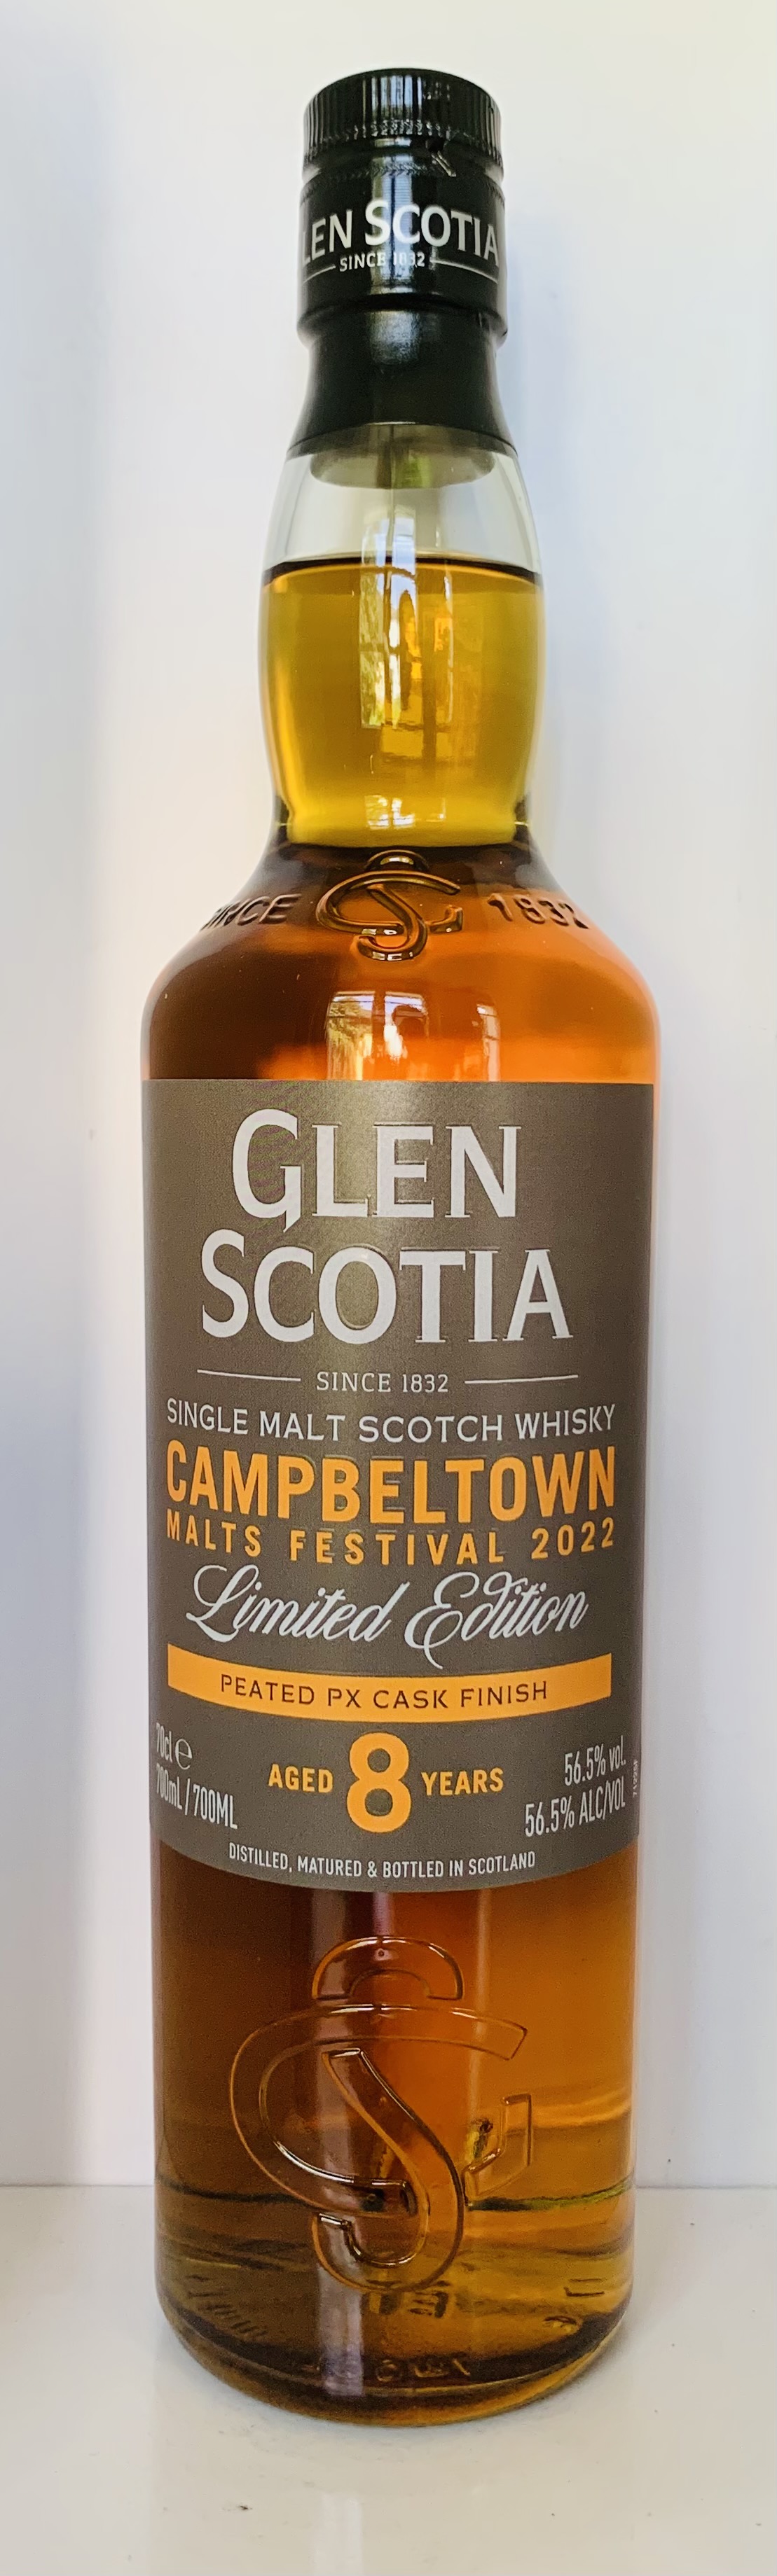 Glen Scotia 8 Jahre Peated PX Sherry Finish Campbeltown Malts Festival 2022